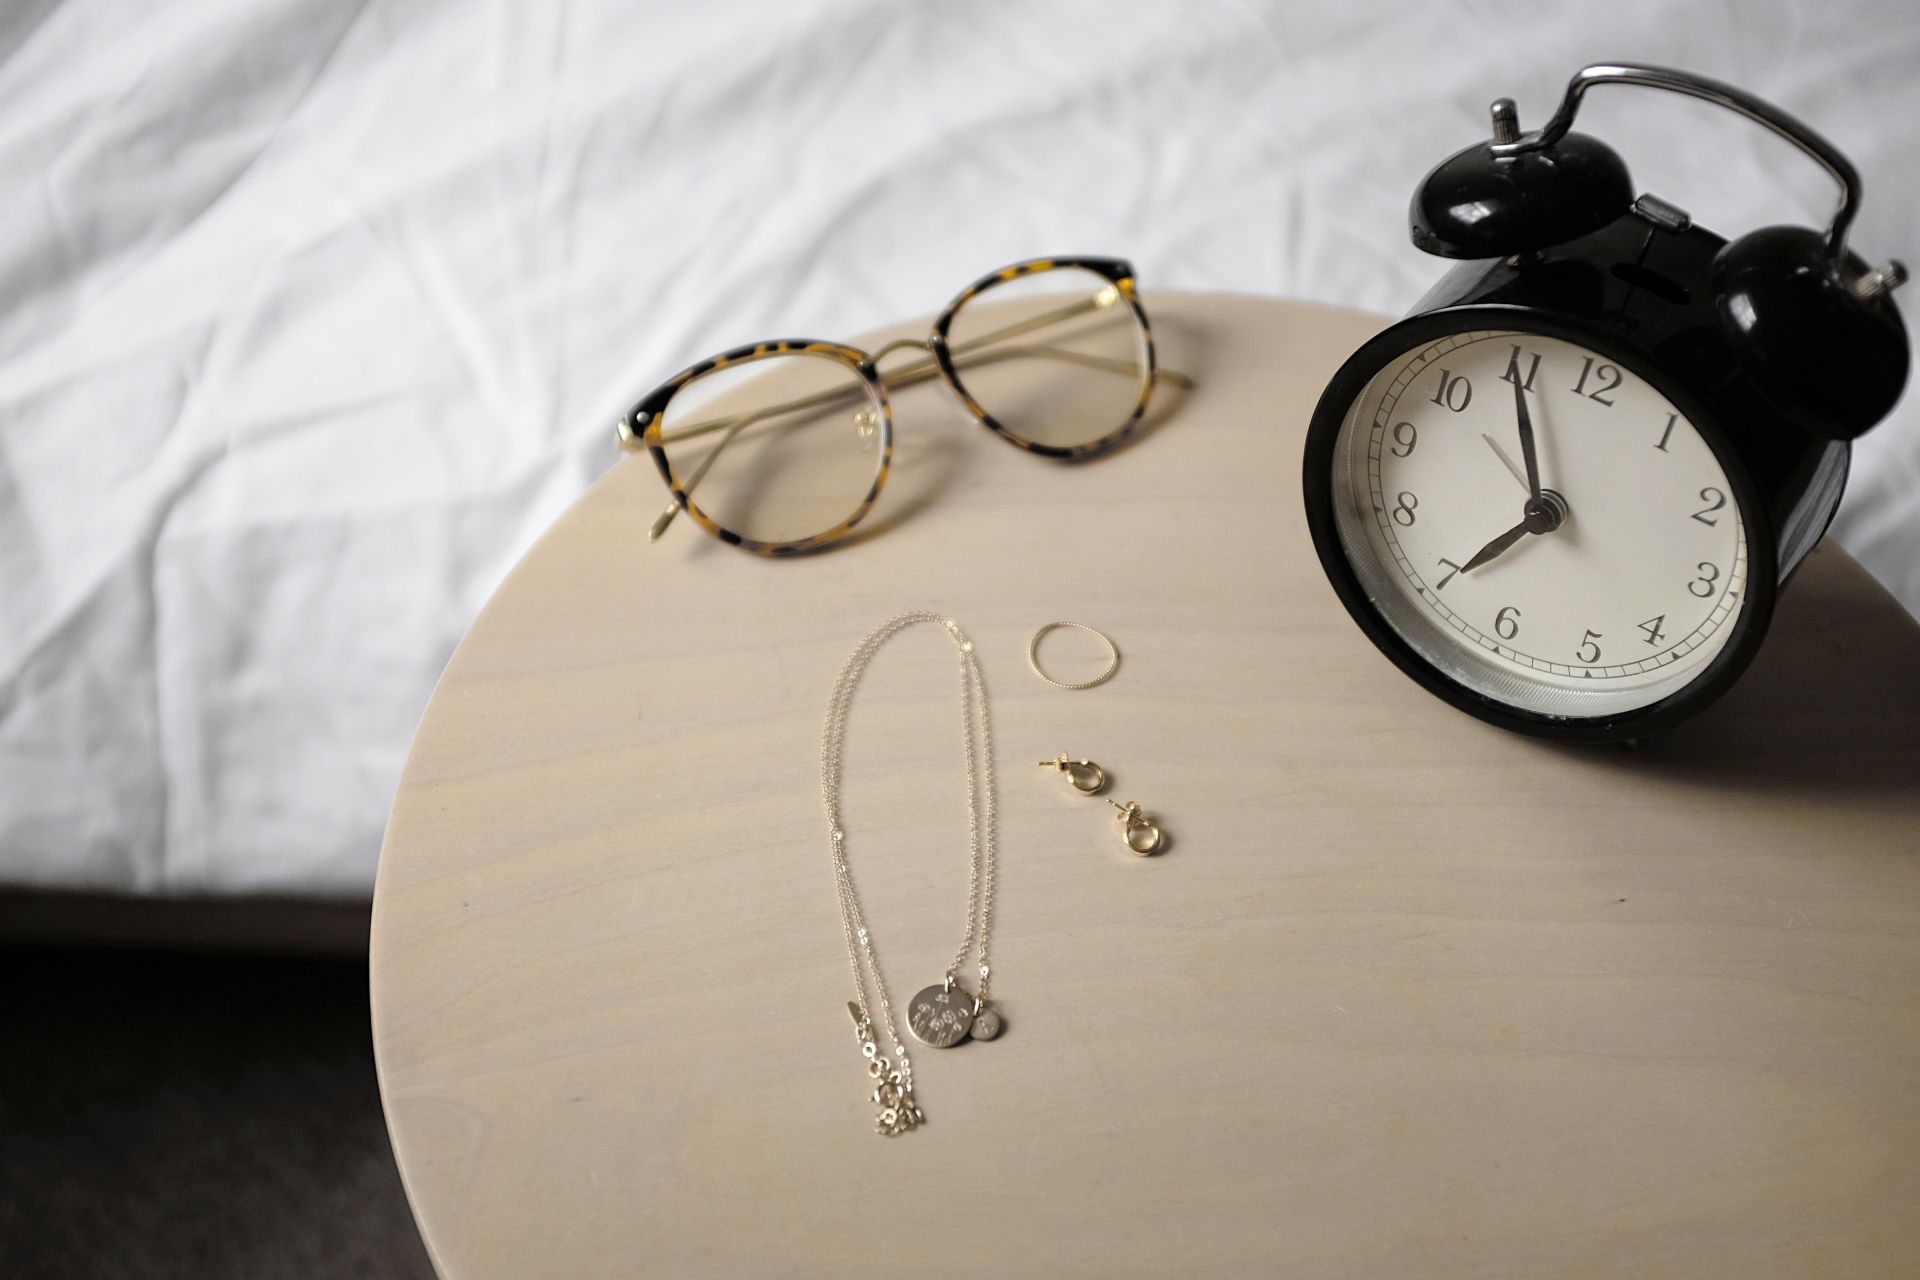 A pair of glasses, a clock, and a necklace, ring, and earrings sit on a nightstand